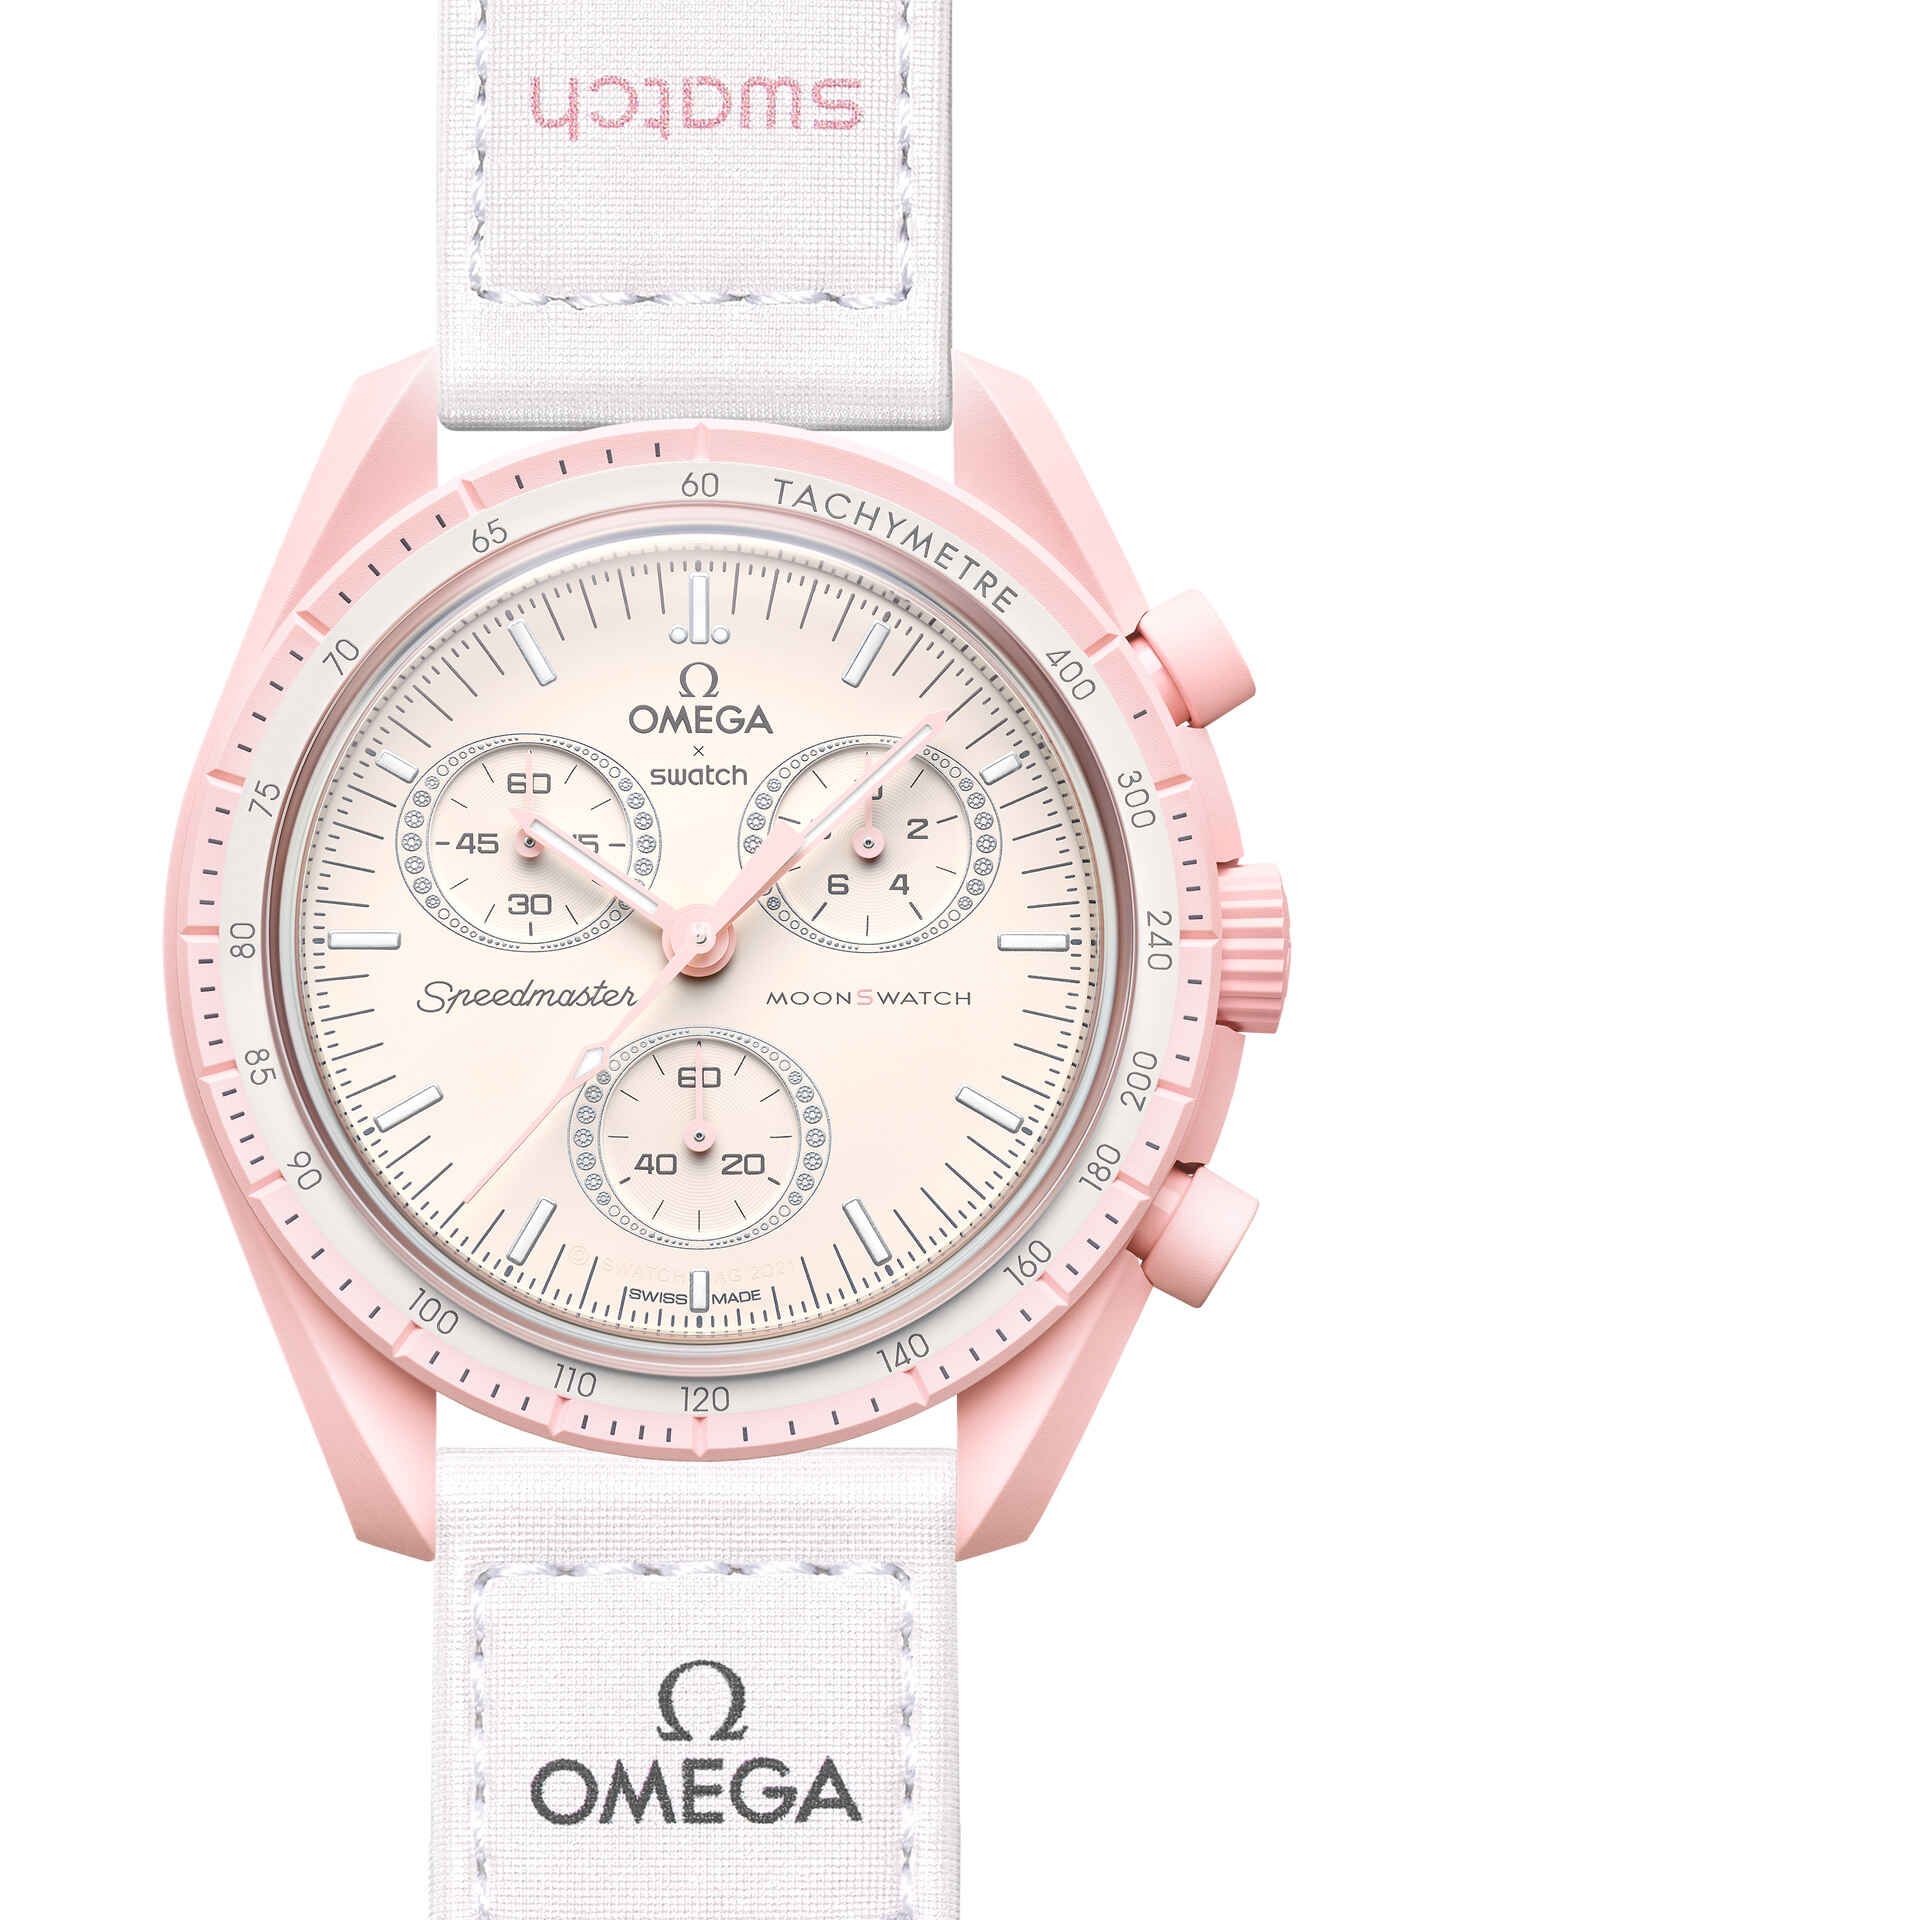 SWATCH X OMEGA MISSION TO VENUS COLLAB SWATCH OMEGA SOLD OUT 将斯沃琪的创新生物陶瓷与欧米茄超霸月球&hellip;